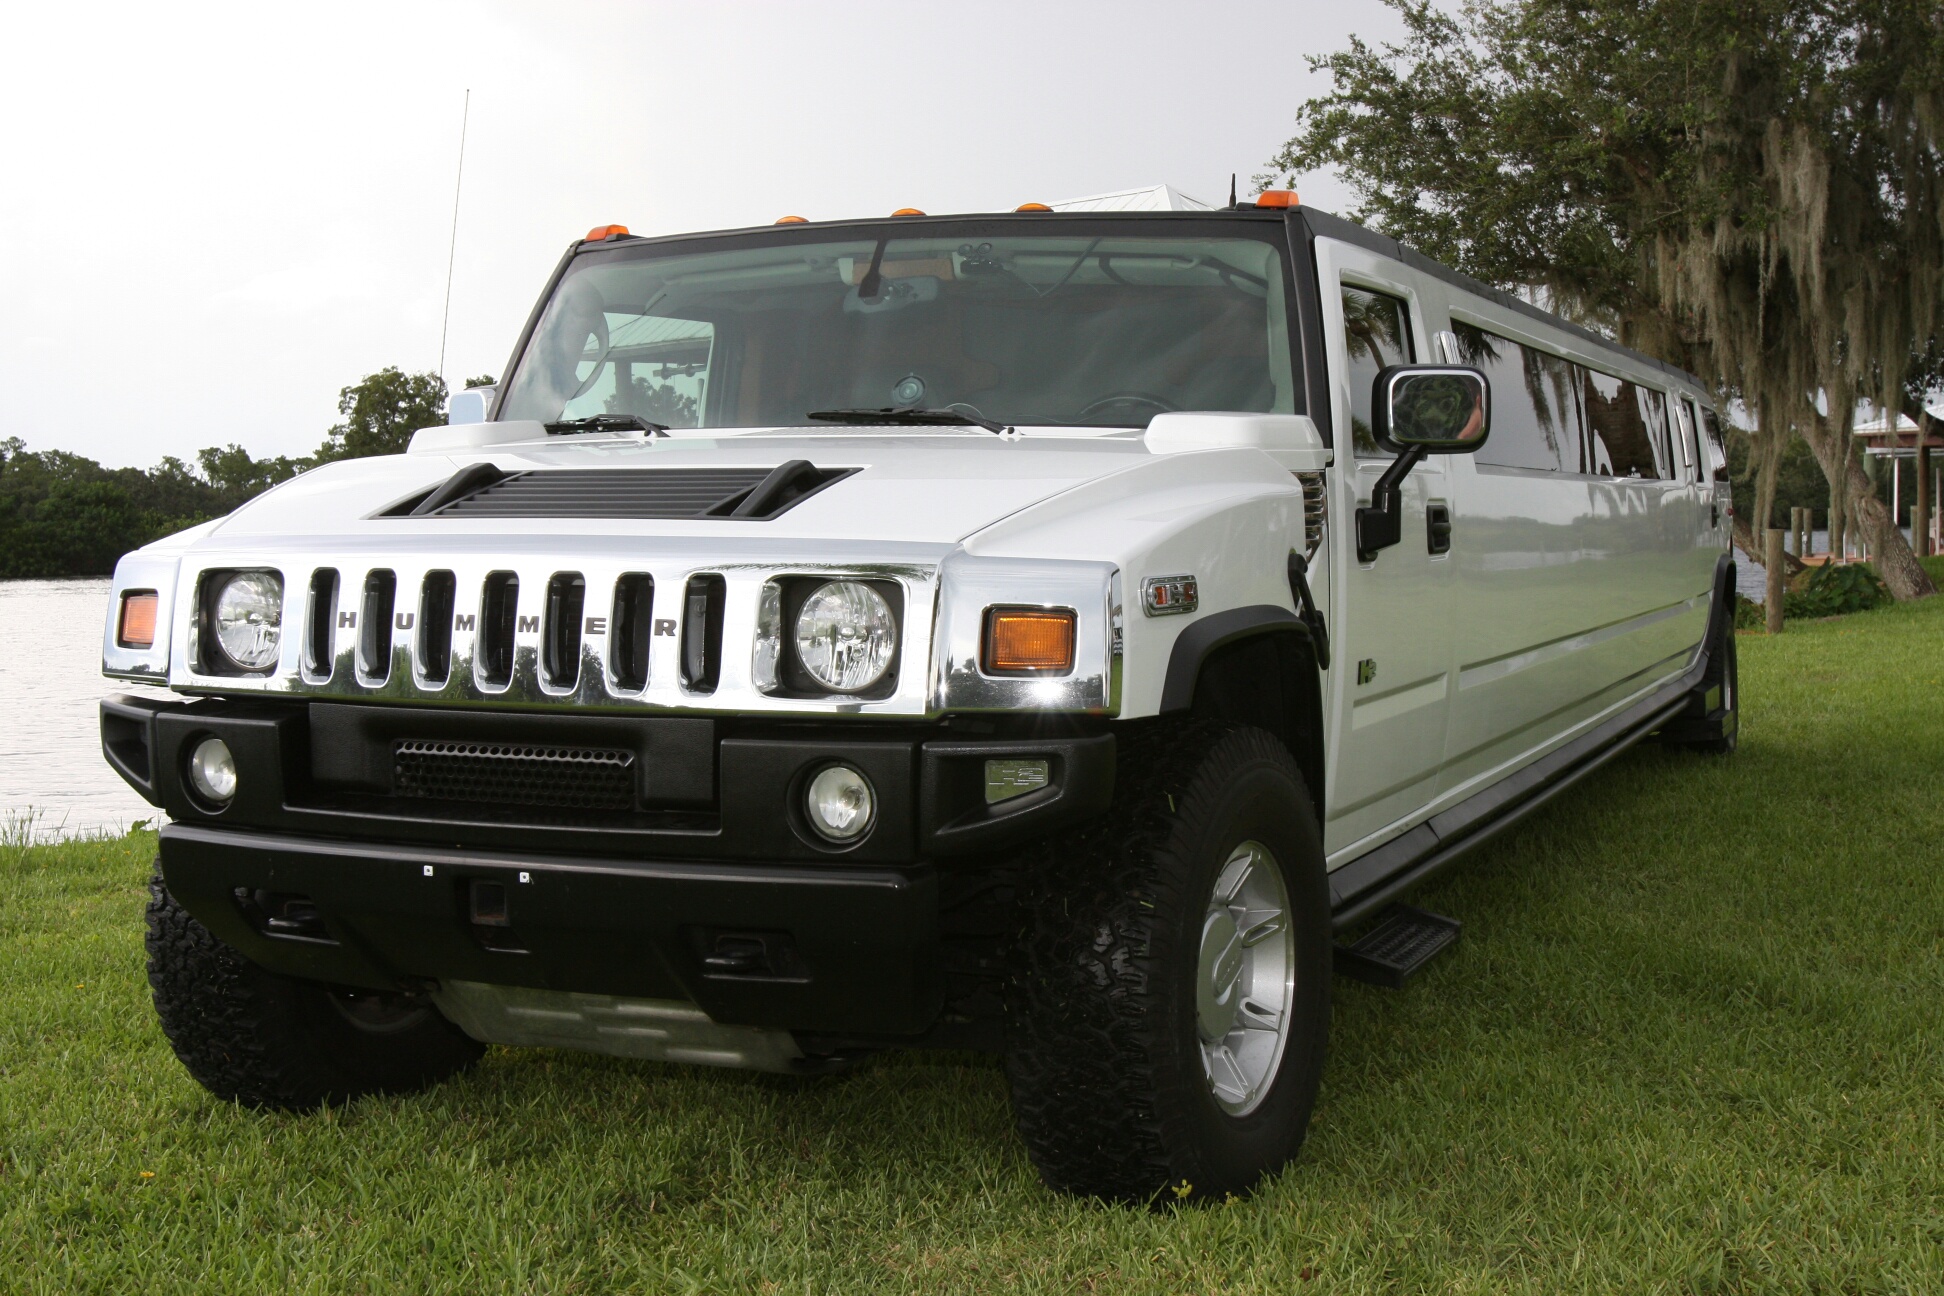 Clermont White Hummer Limo 